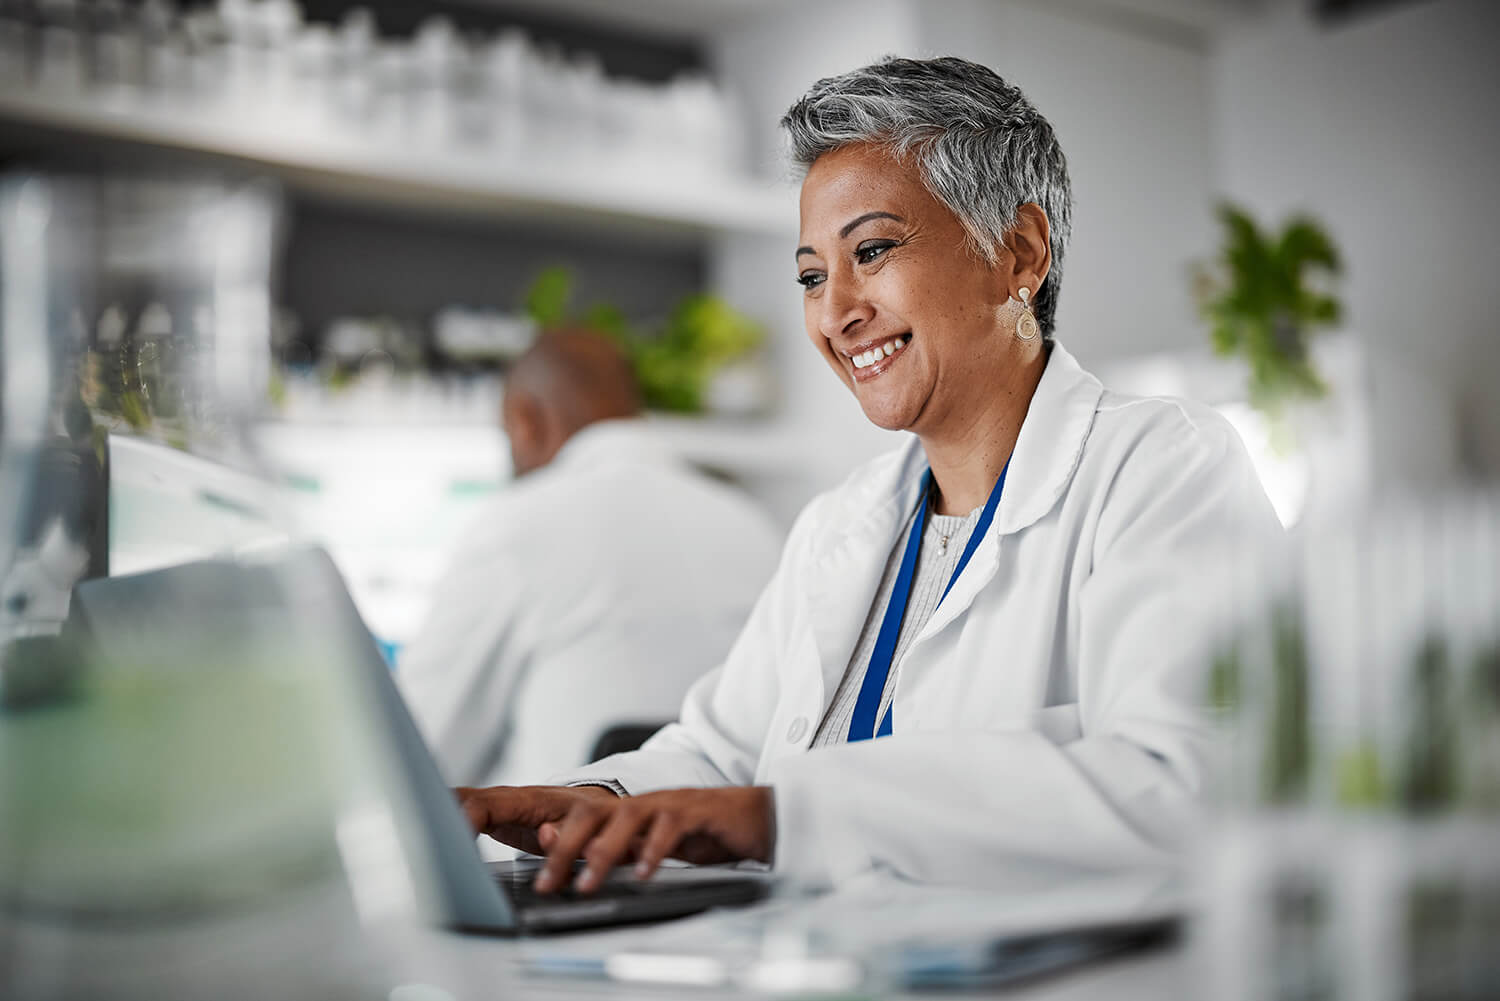 Fastest Way to Grow Revenue? Conduct Clinical Trials at Your Primary Care Practice. Here’s How.